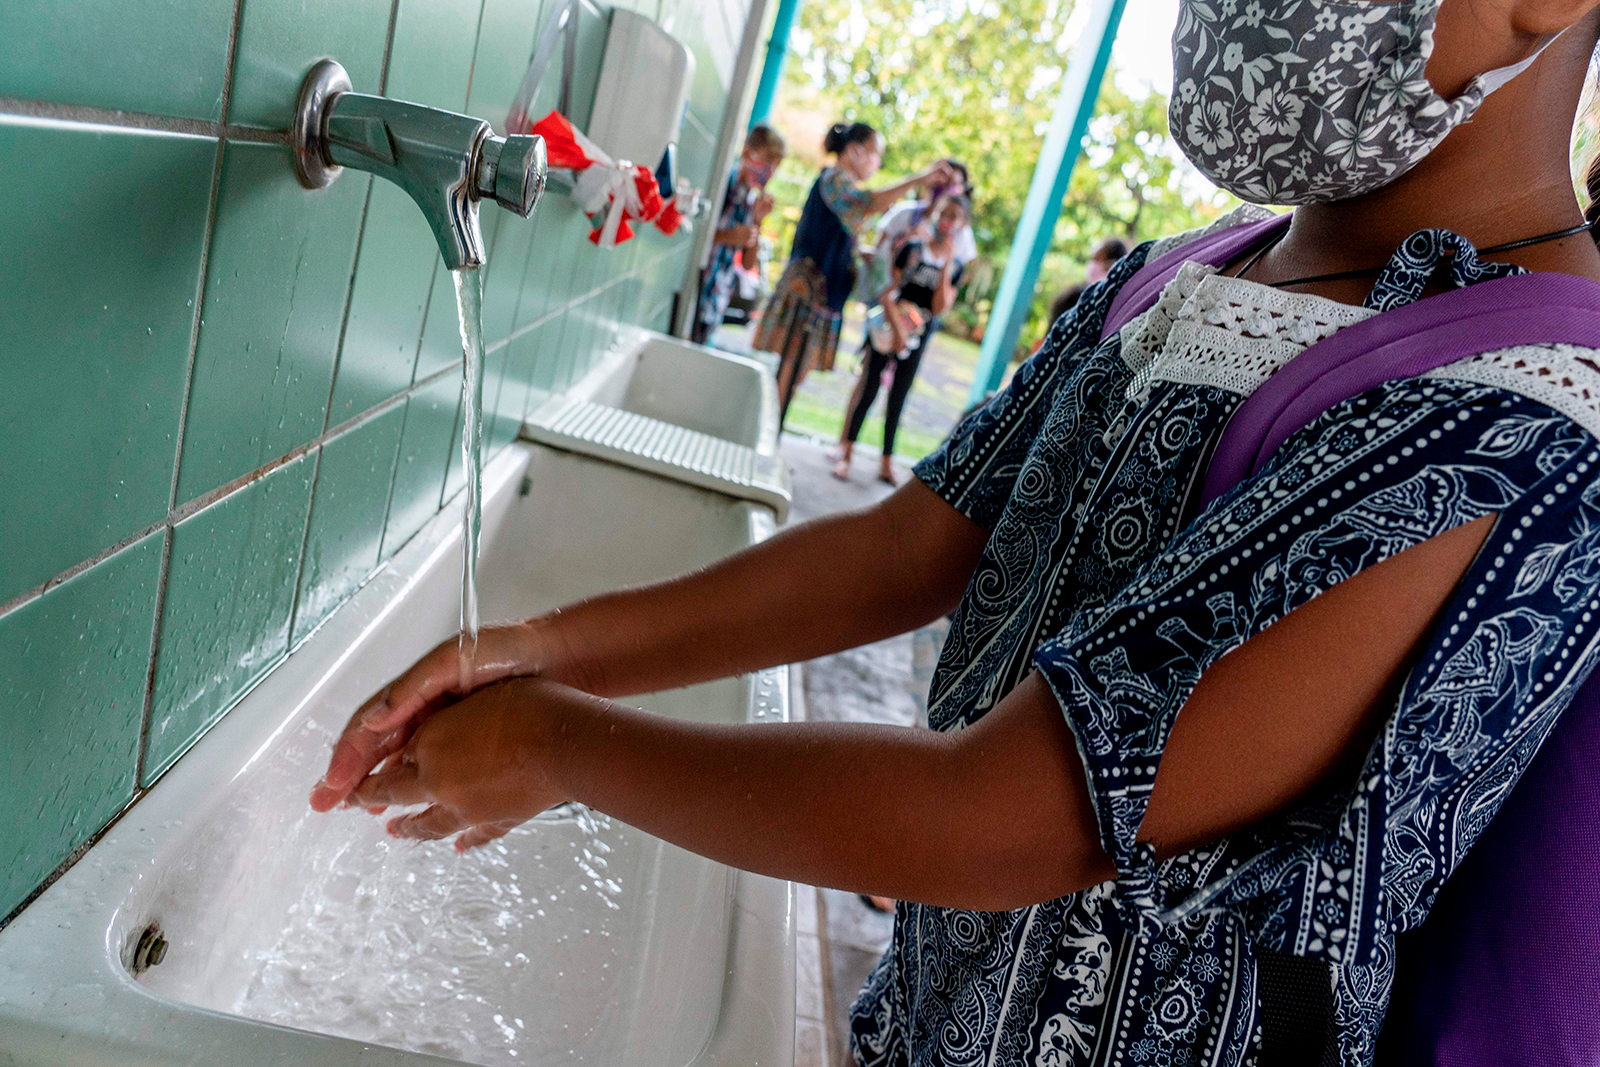 A schoolgirl wearing a protective face mask washes her hands as she arrives at the Taimoana Primary school in Papeete, on the French Polynesia island of Tahiti, on Monday, May 18.